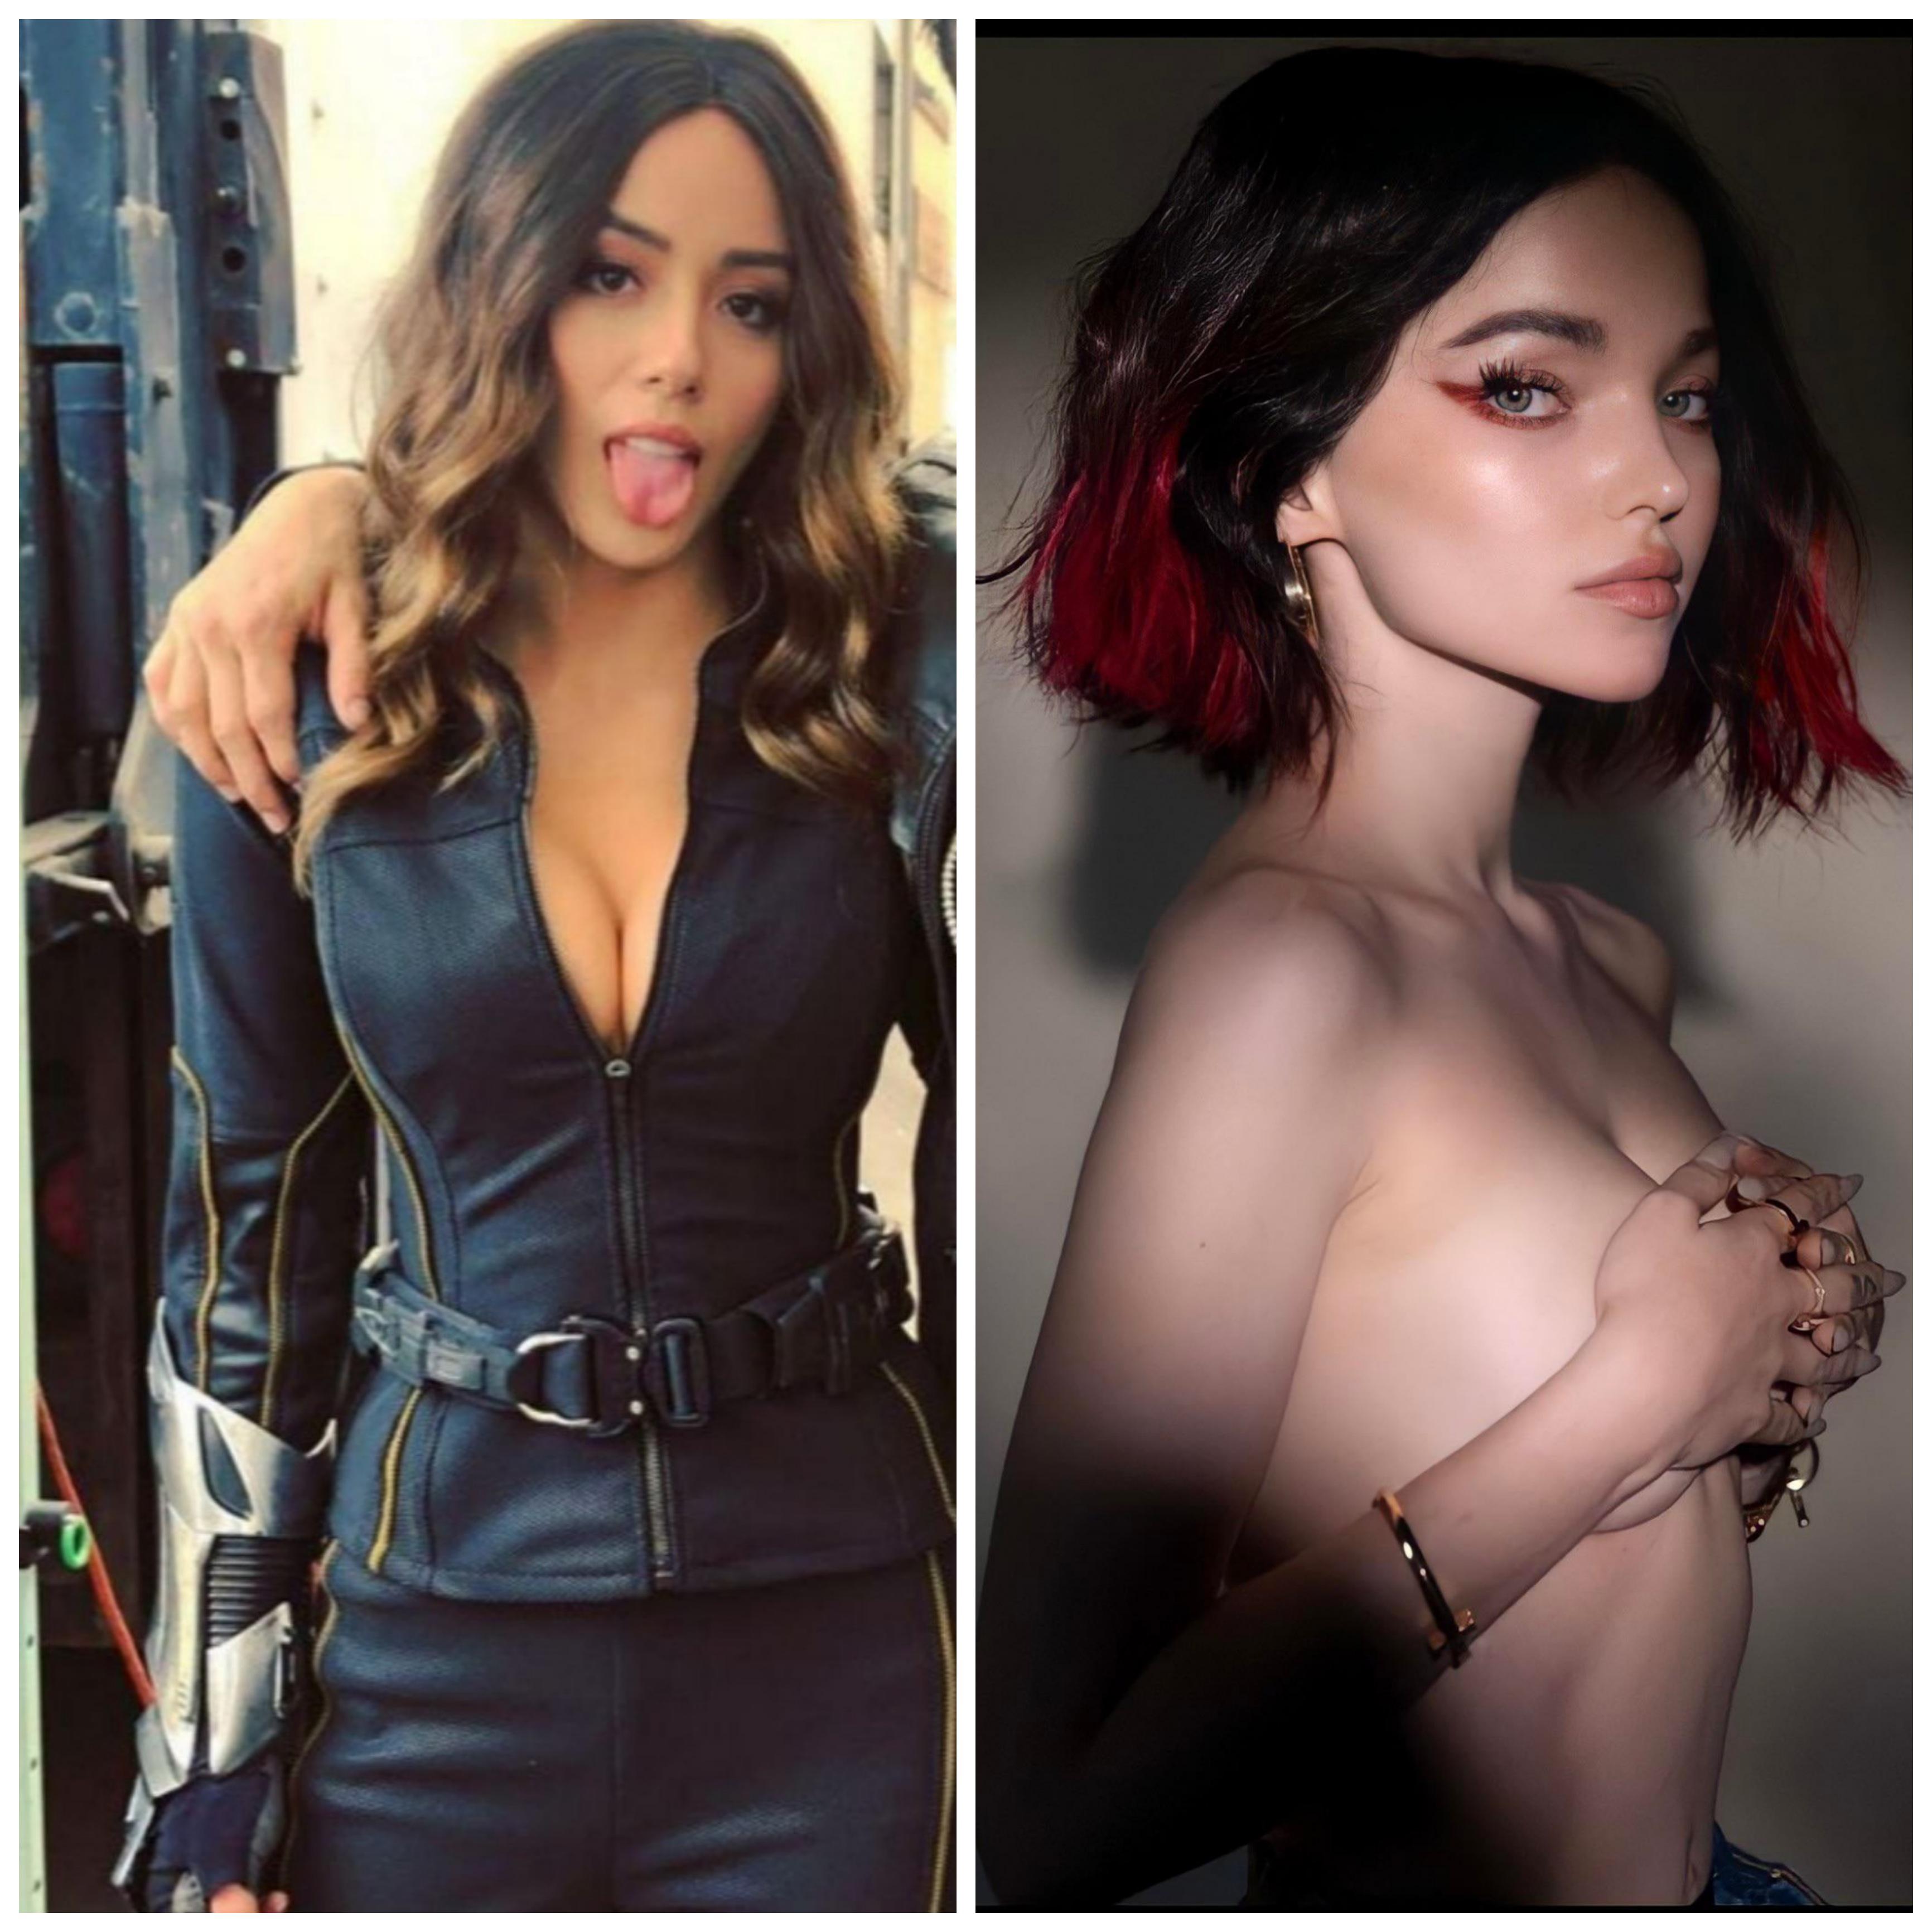 I Need Some Buds To Help Me Cum To Chloe Bennet Or Dove Camerons Sexy Bodies Bi Welcom